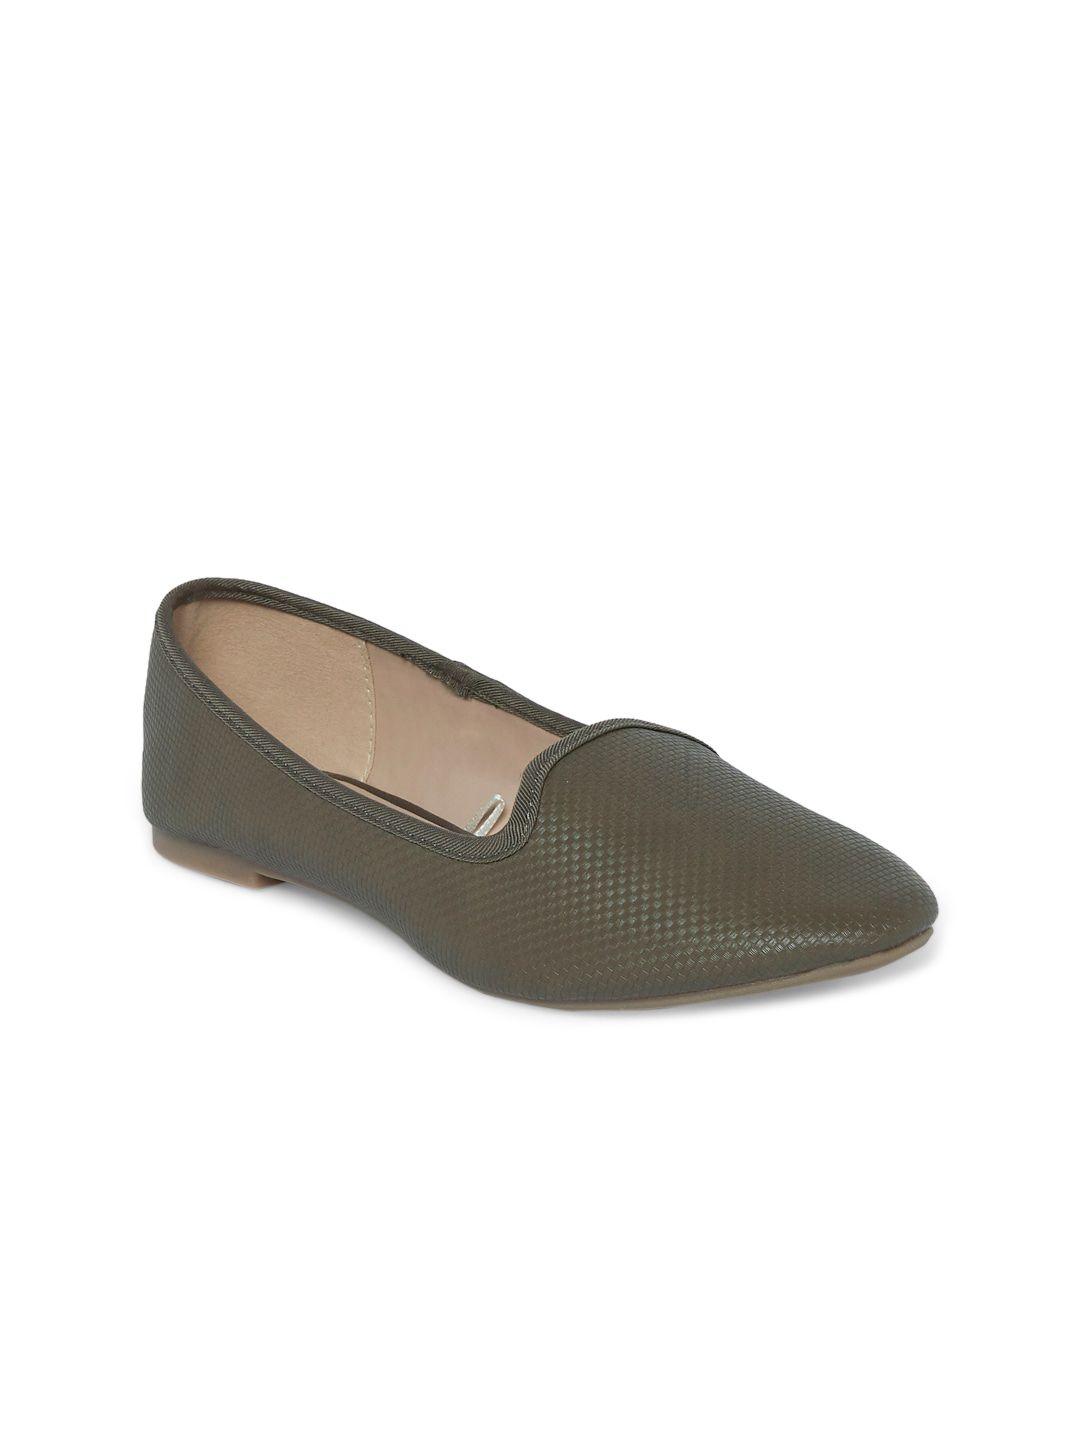 forever-glam-by-pantaloons-women-olive-green-ballerinas-flats